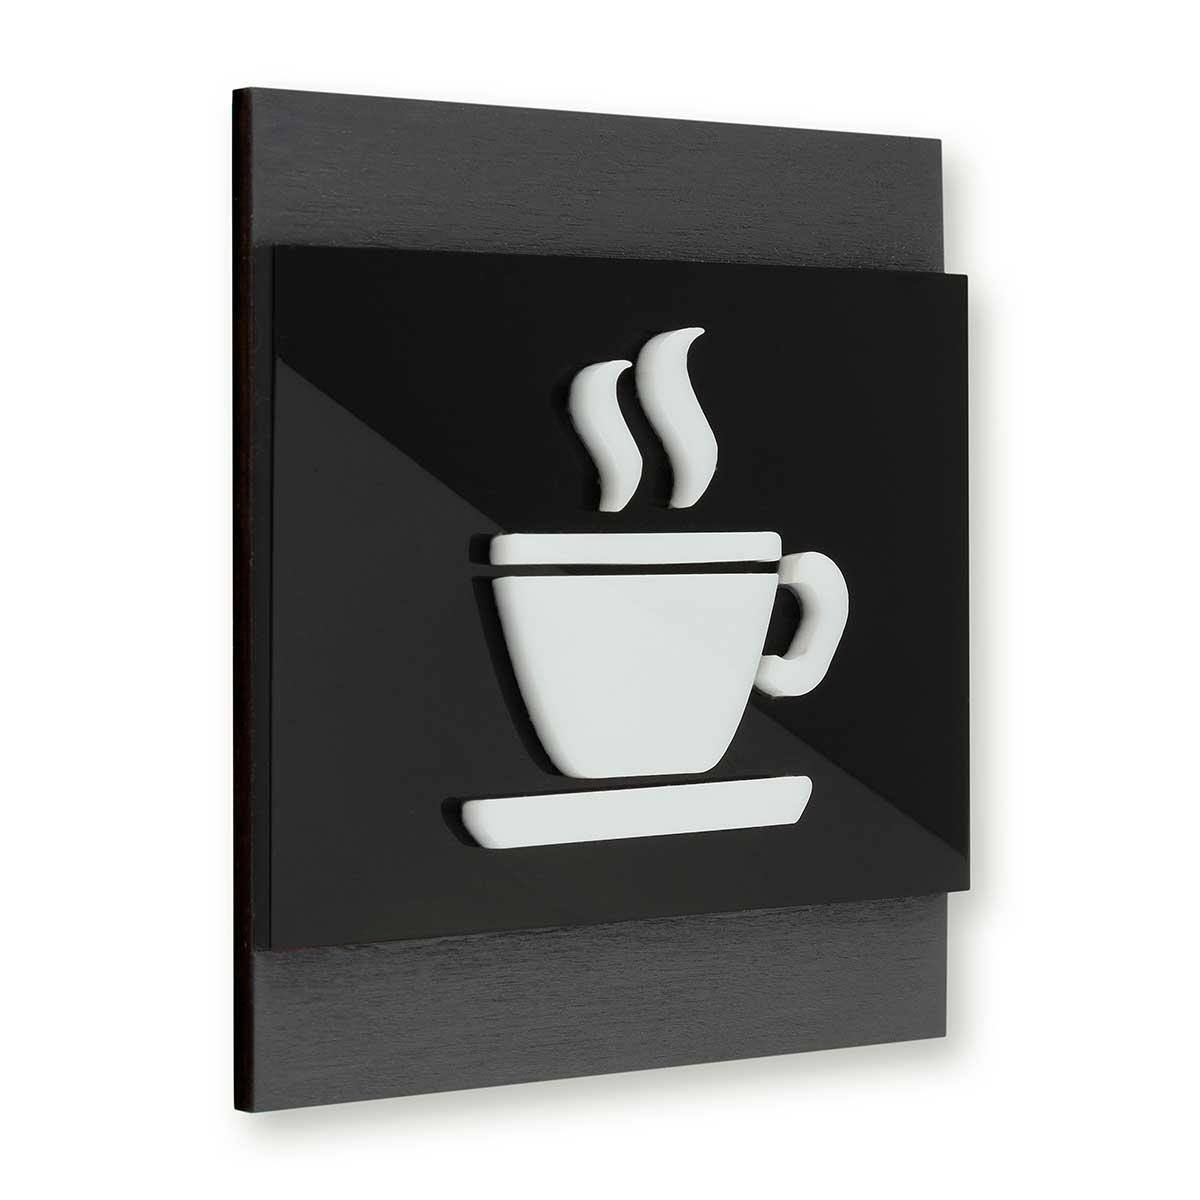 Wooden Door Signs for Kitchen Information signs Anthracite Gray Bsign